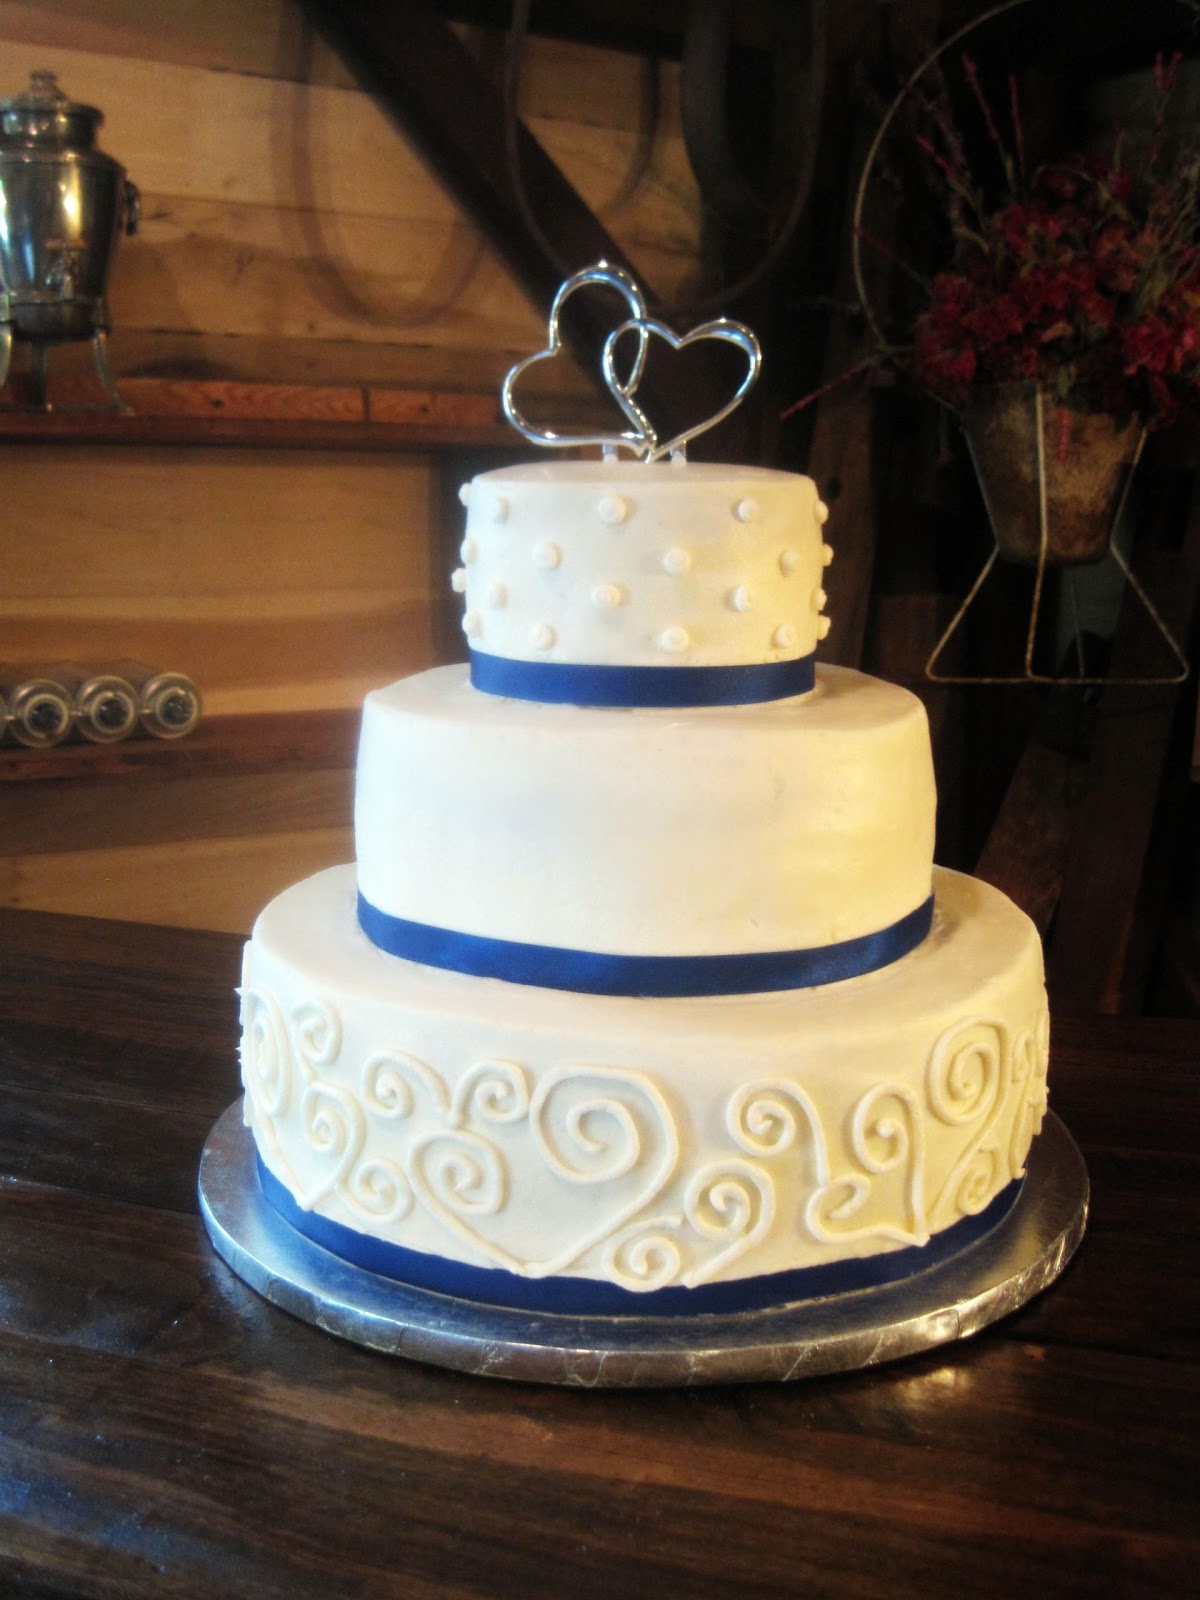 Have a Piece of Cake: A Beautiful Country Wedding Cake